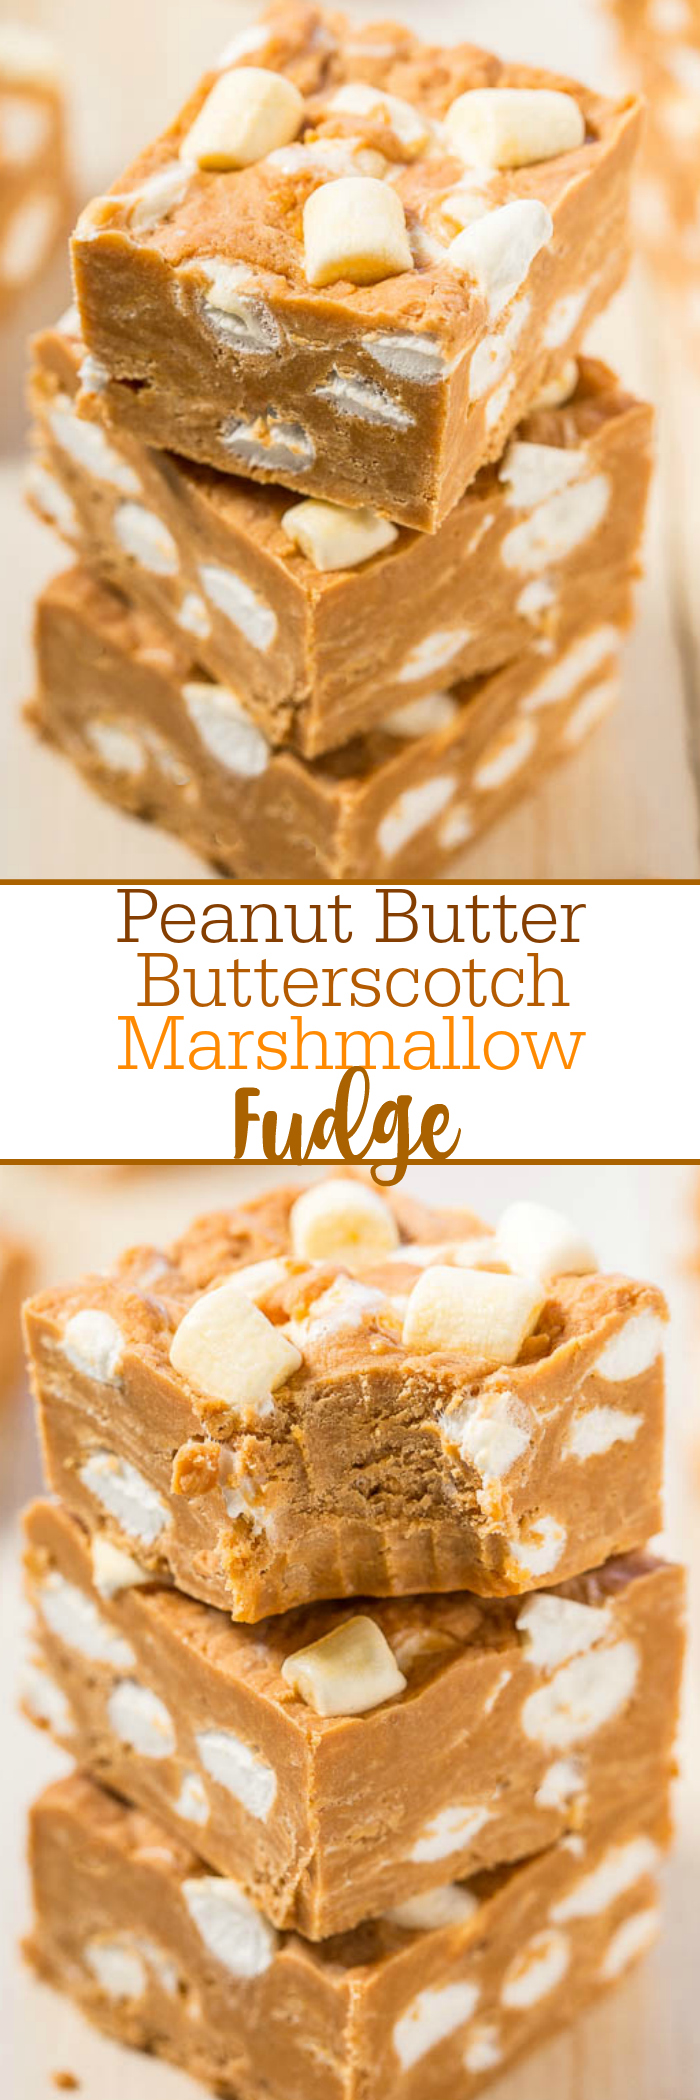 Peanut Butter Butterscotch Marshmallow Fudge - Easy, no-bake fudge with bold peanut butter flavor!! Peanut butter lovers will go nuts! The marshmallows are like biting into soft clouds amidst dense, rich fudge!!